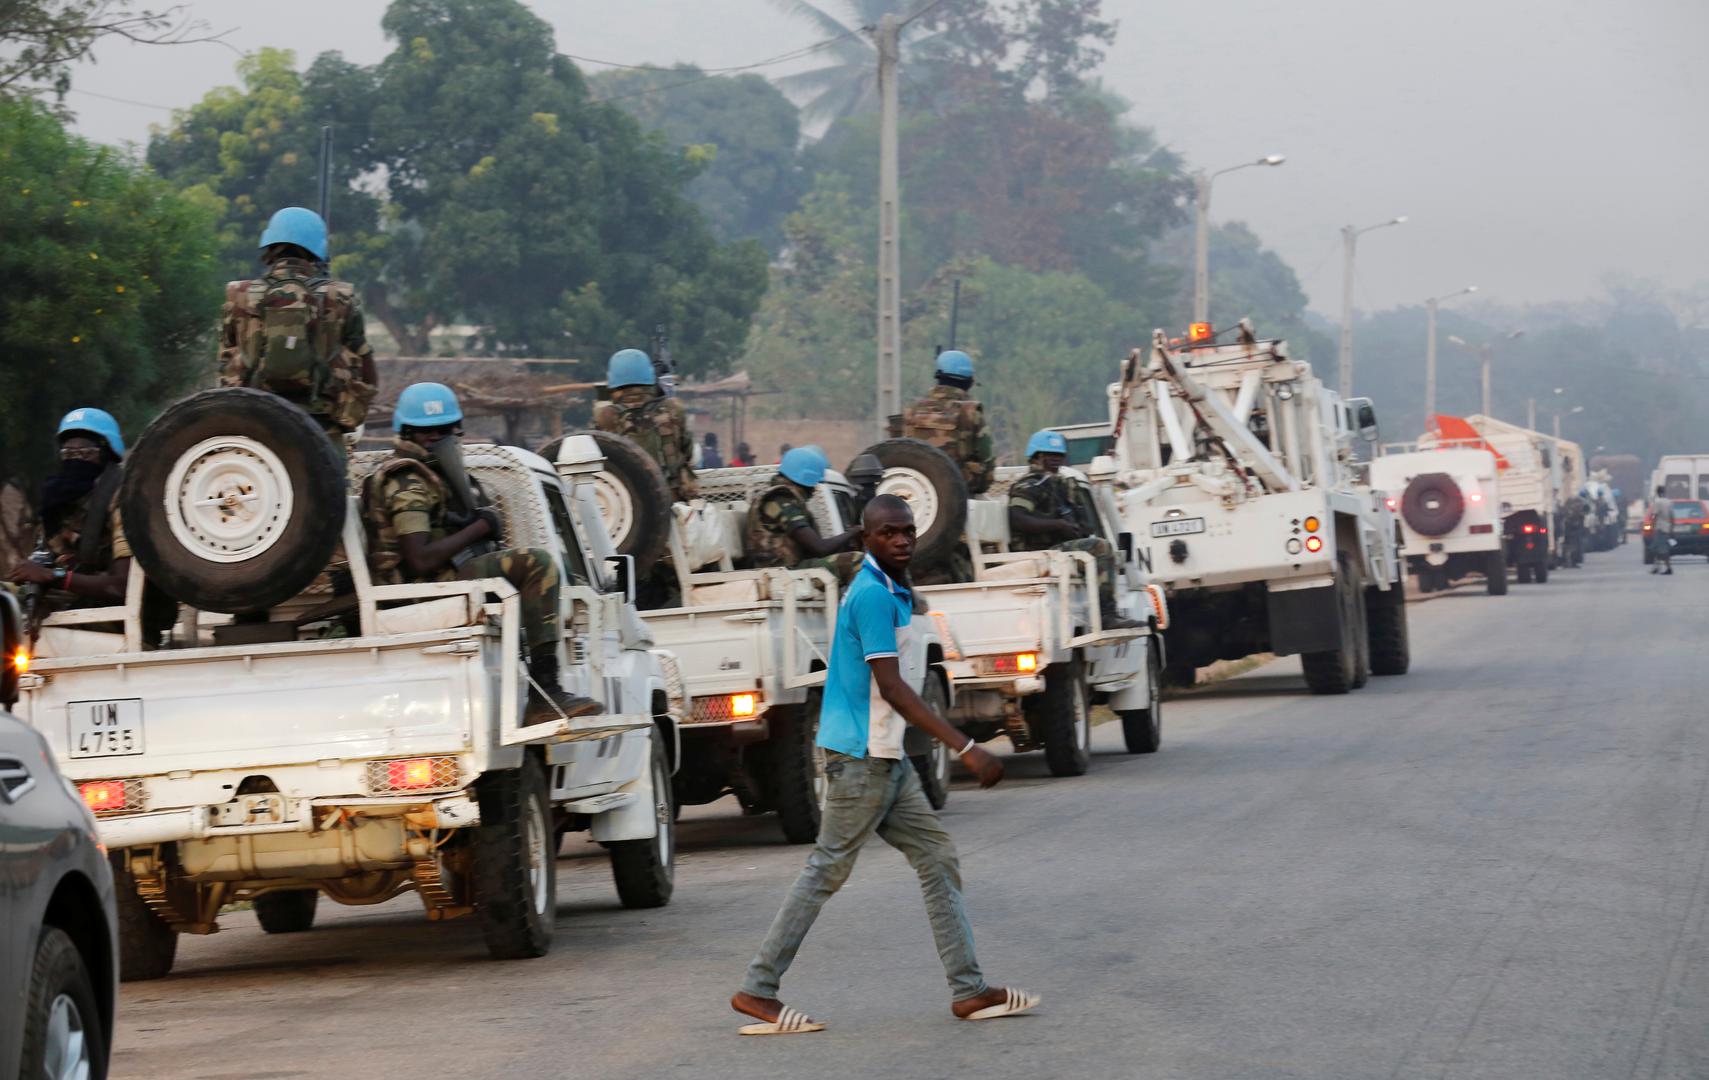 A convoy of United Nation peacekeepers are seen outside Bouake during an army mutiny in which disgruntled Ivorian soldiers seized control of the city. January 6, 2017.